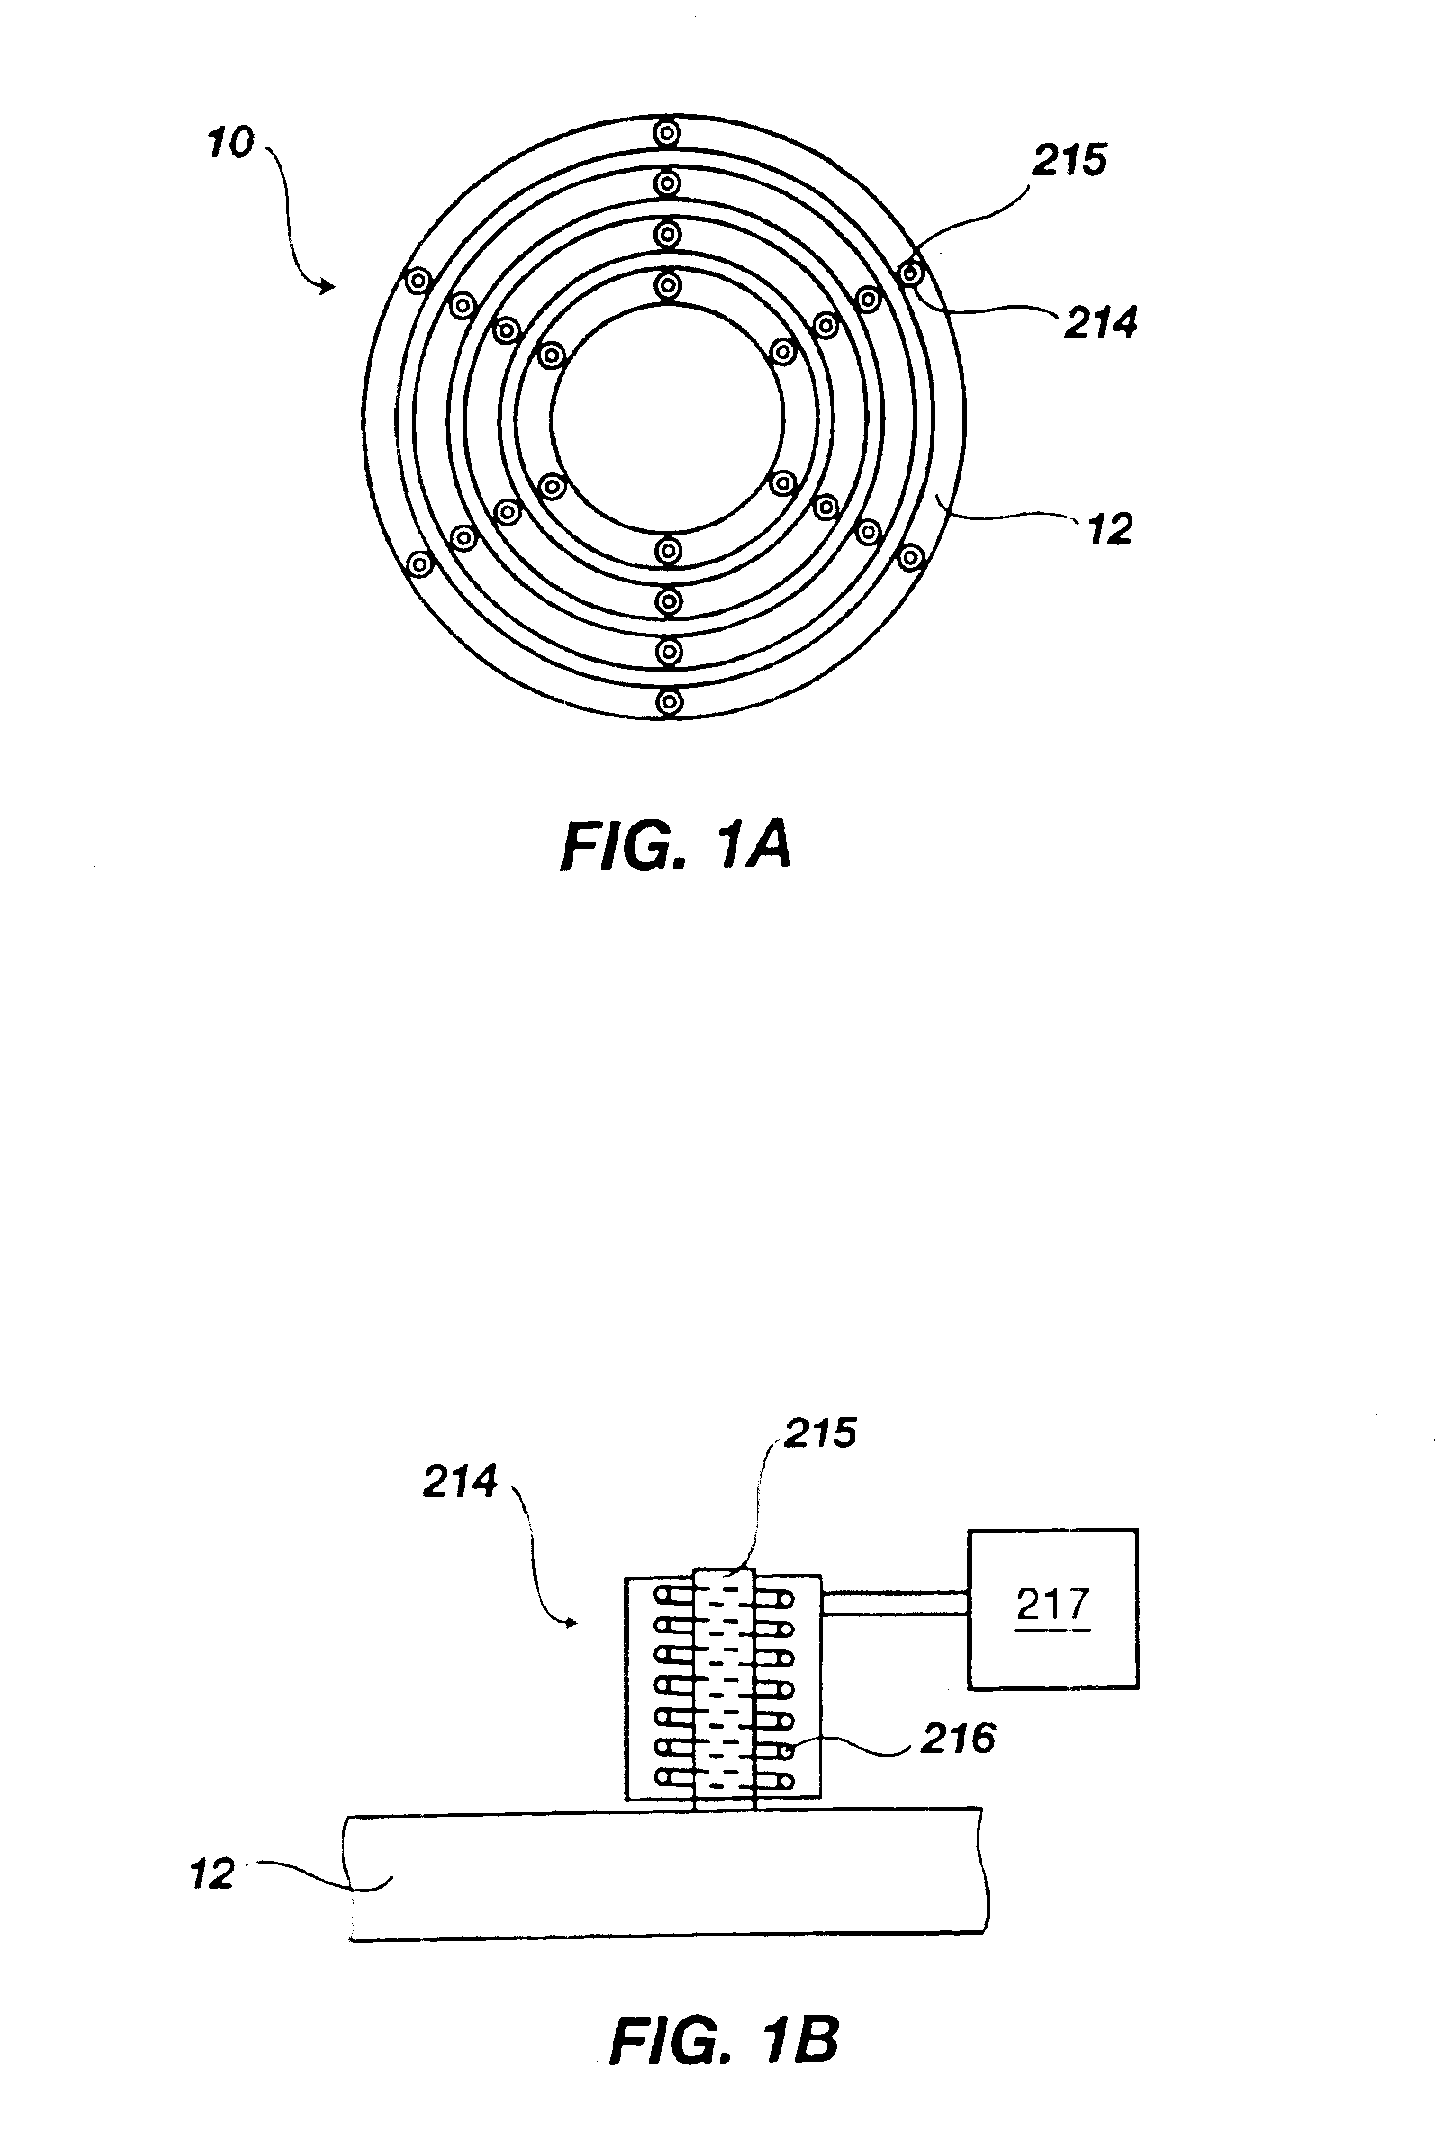 Polishing systems for use with semiconductor substrates including differential pressure application apparatus